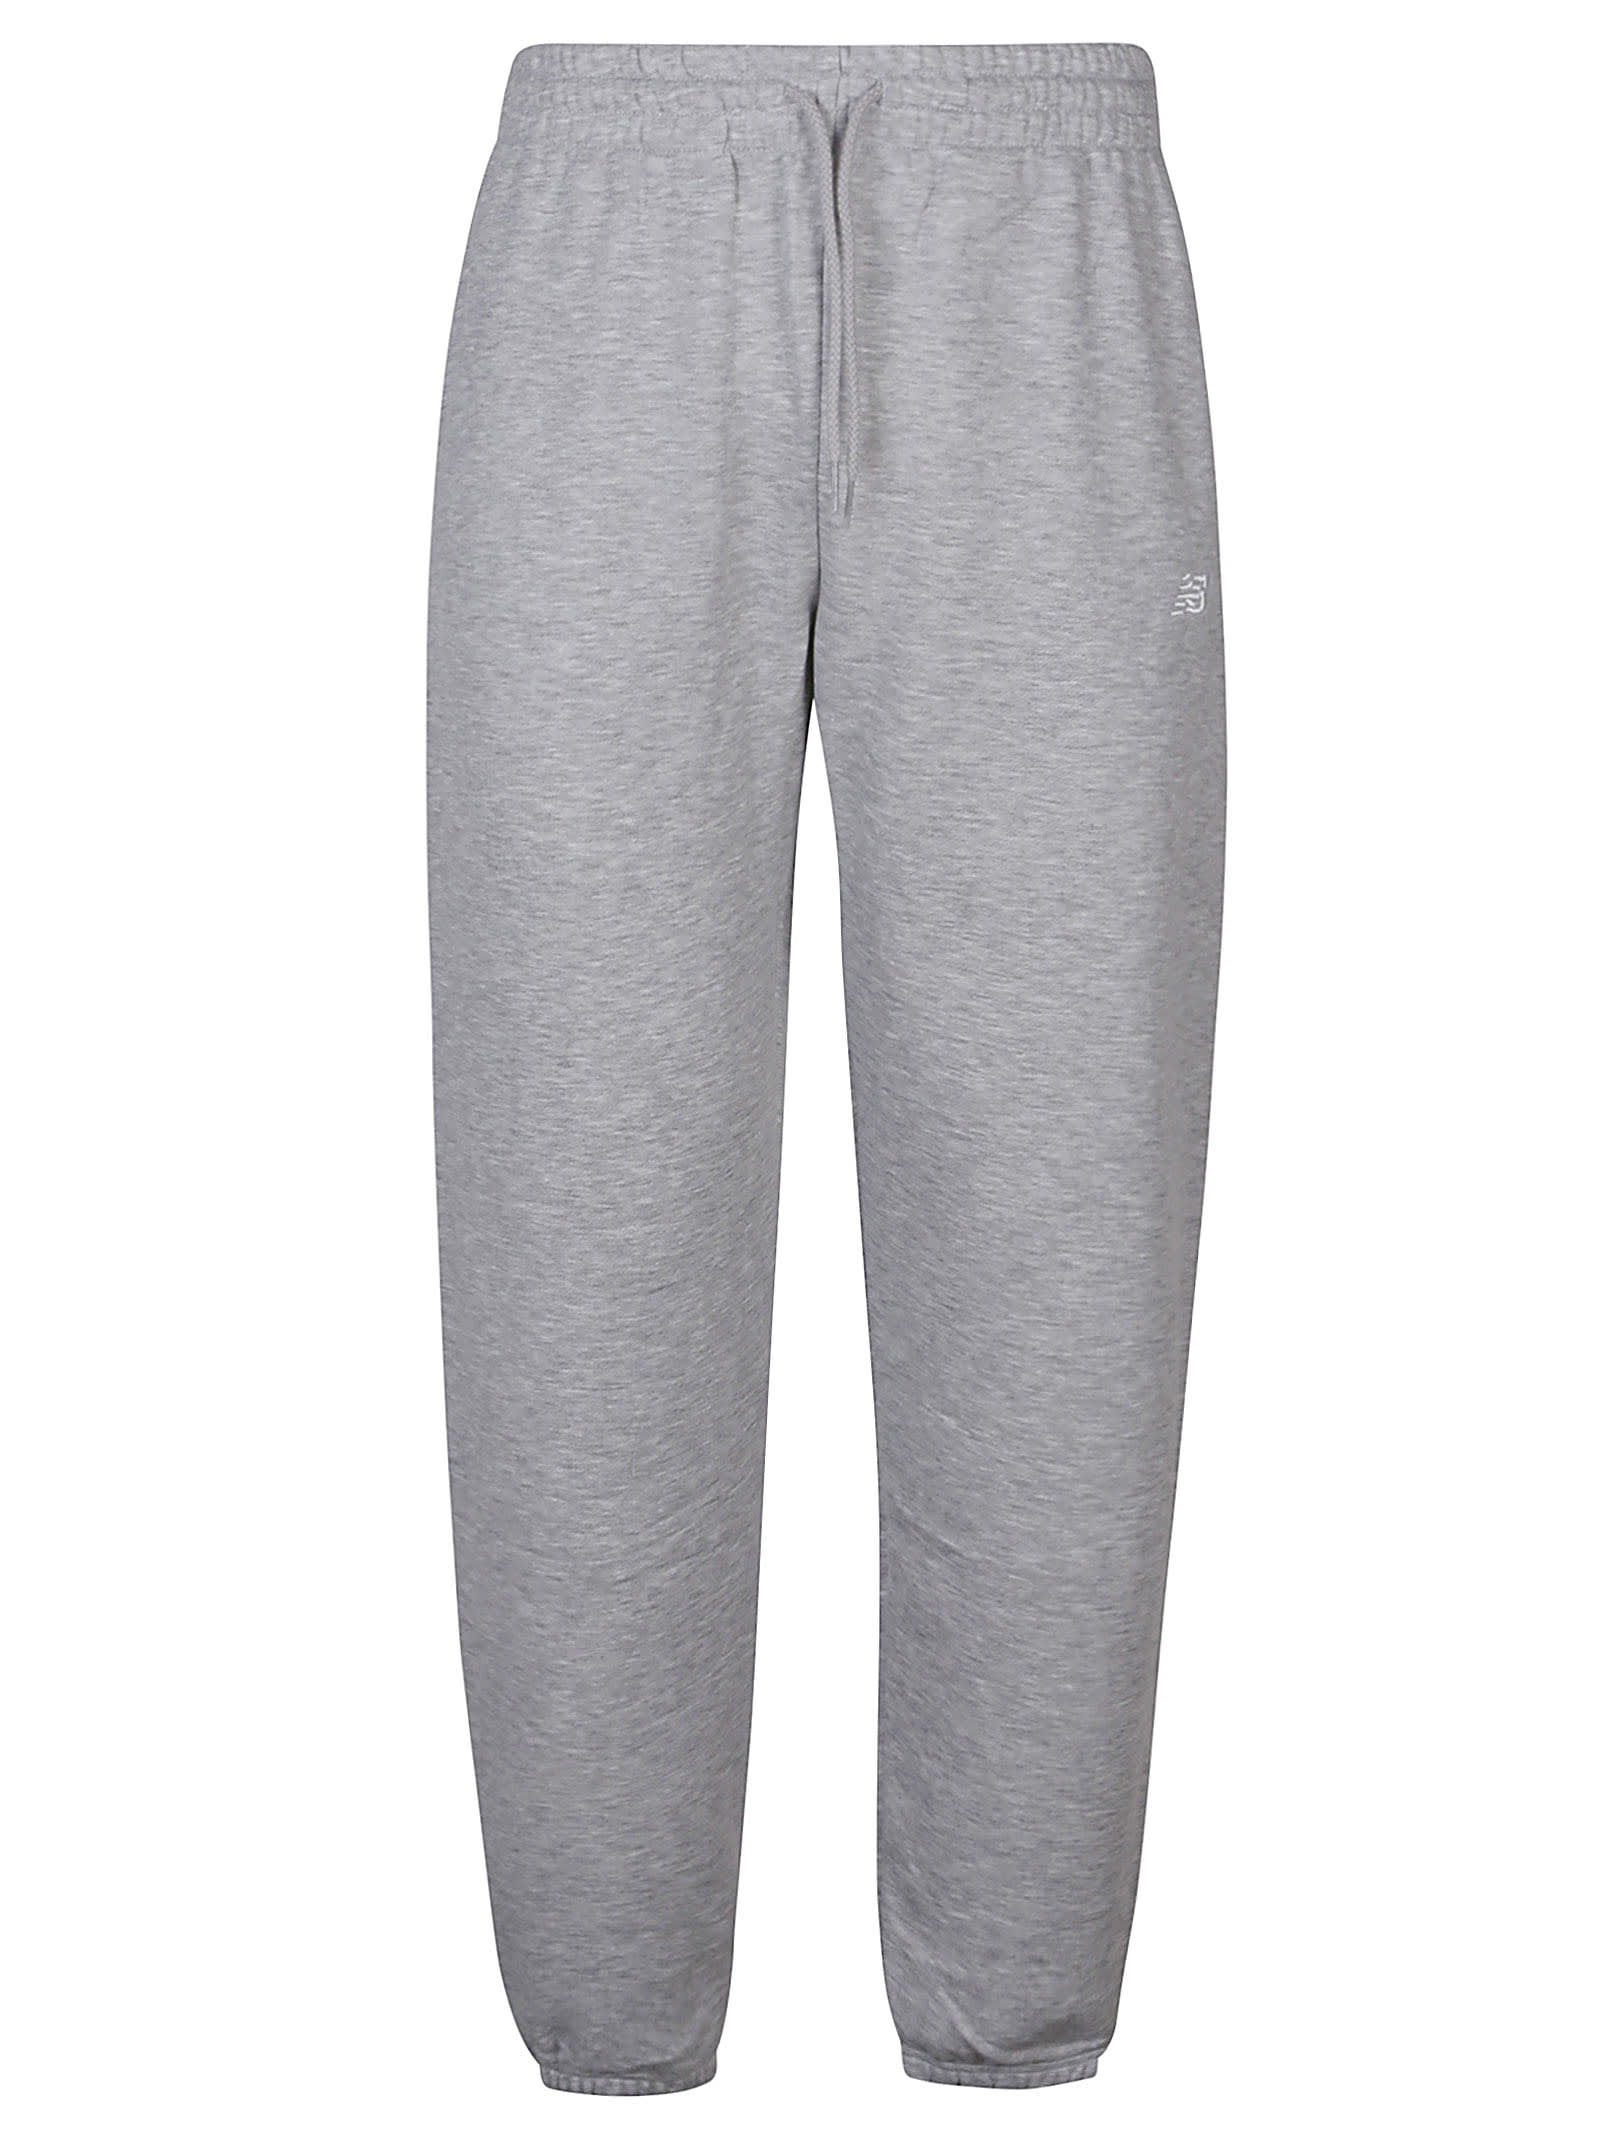 French Terry Jogger Pant